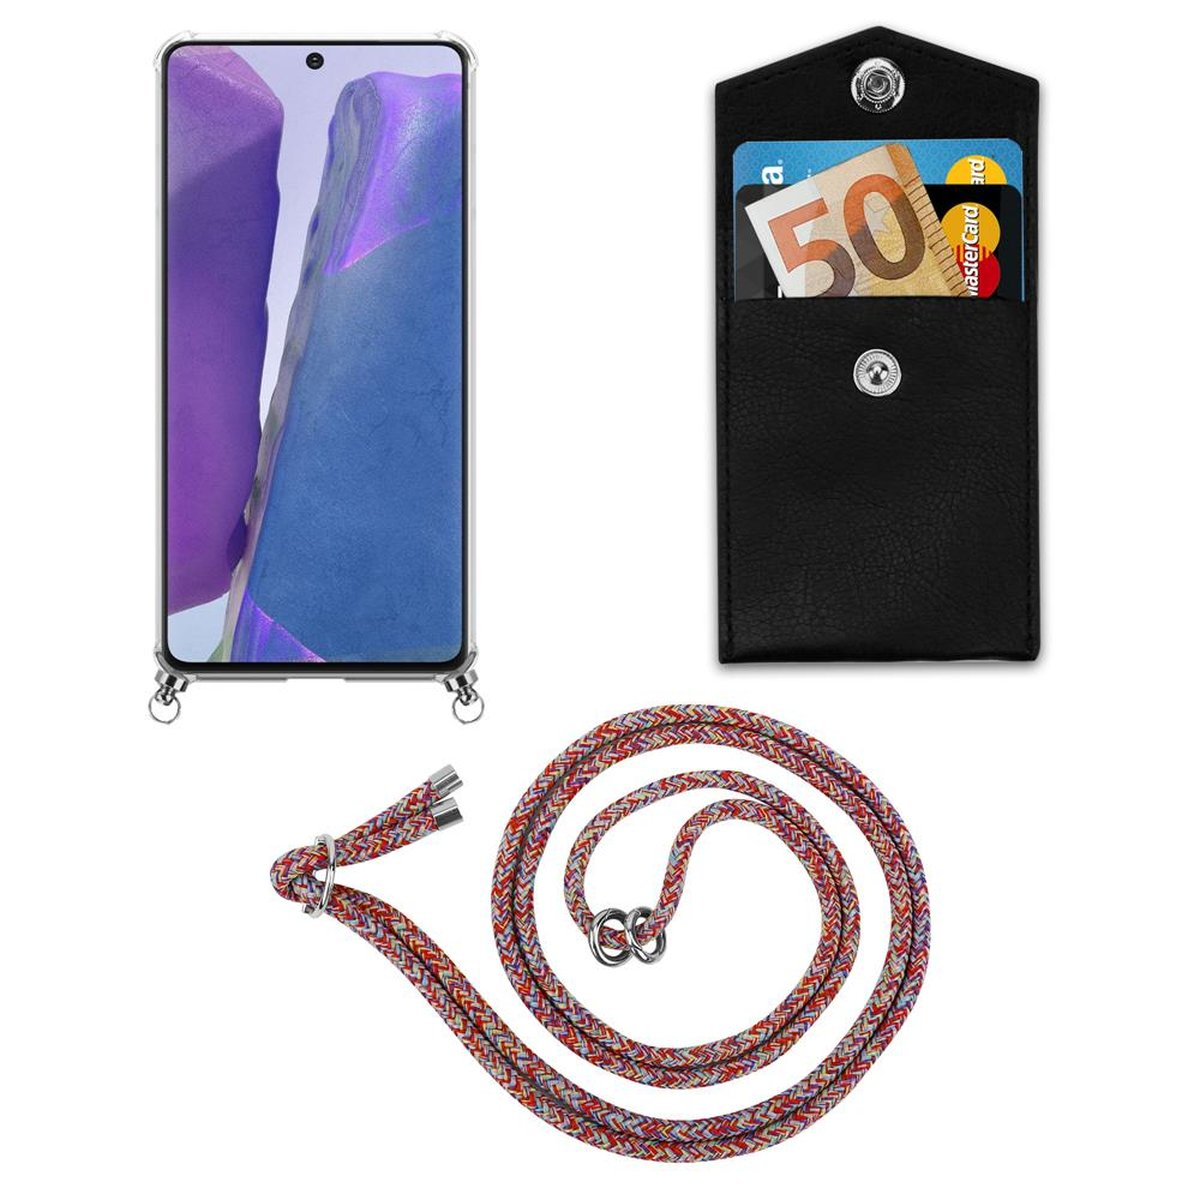 Silber Hülle, Galaxy 20, CADORABO COLORFUL Kordel Band Handy und Kette mit NOTE Samsung, Backcover, Ringen, PARROT abnehmbarer